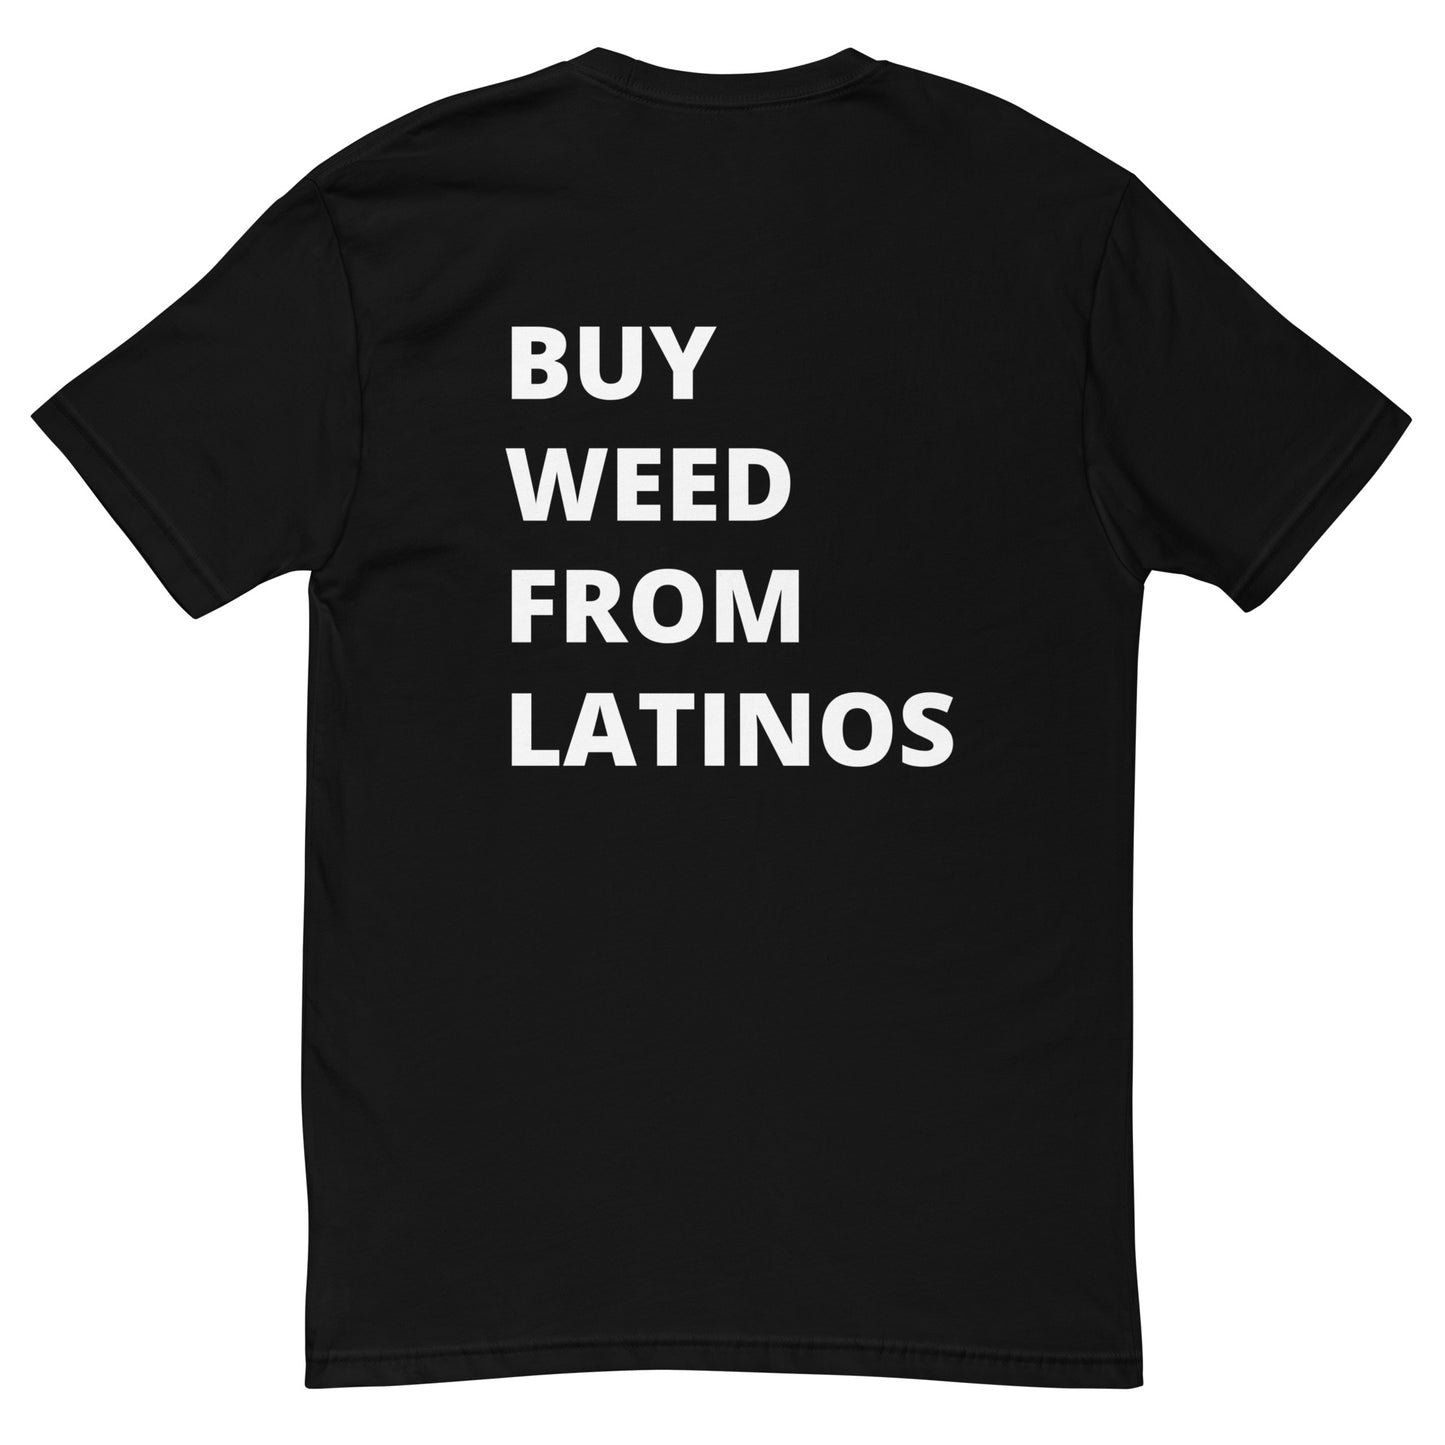 Deo's Garden "Buy Weed From Latinos" Short Sleeve T-shirt